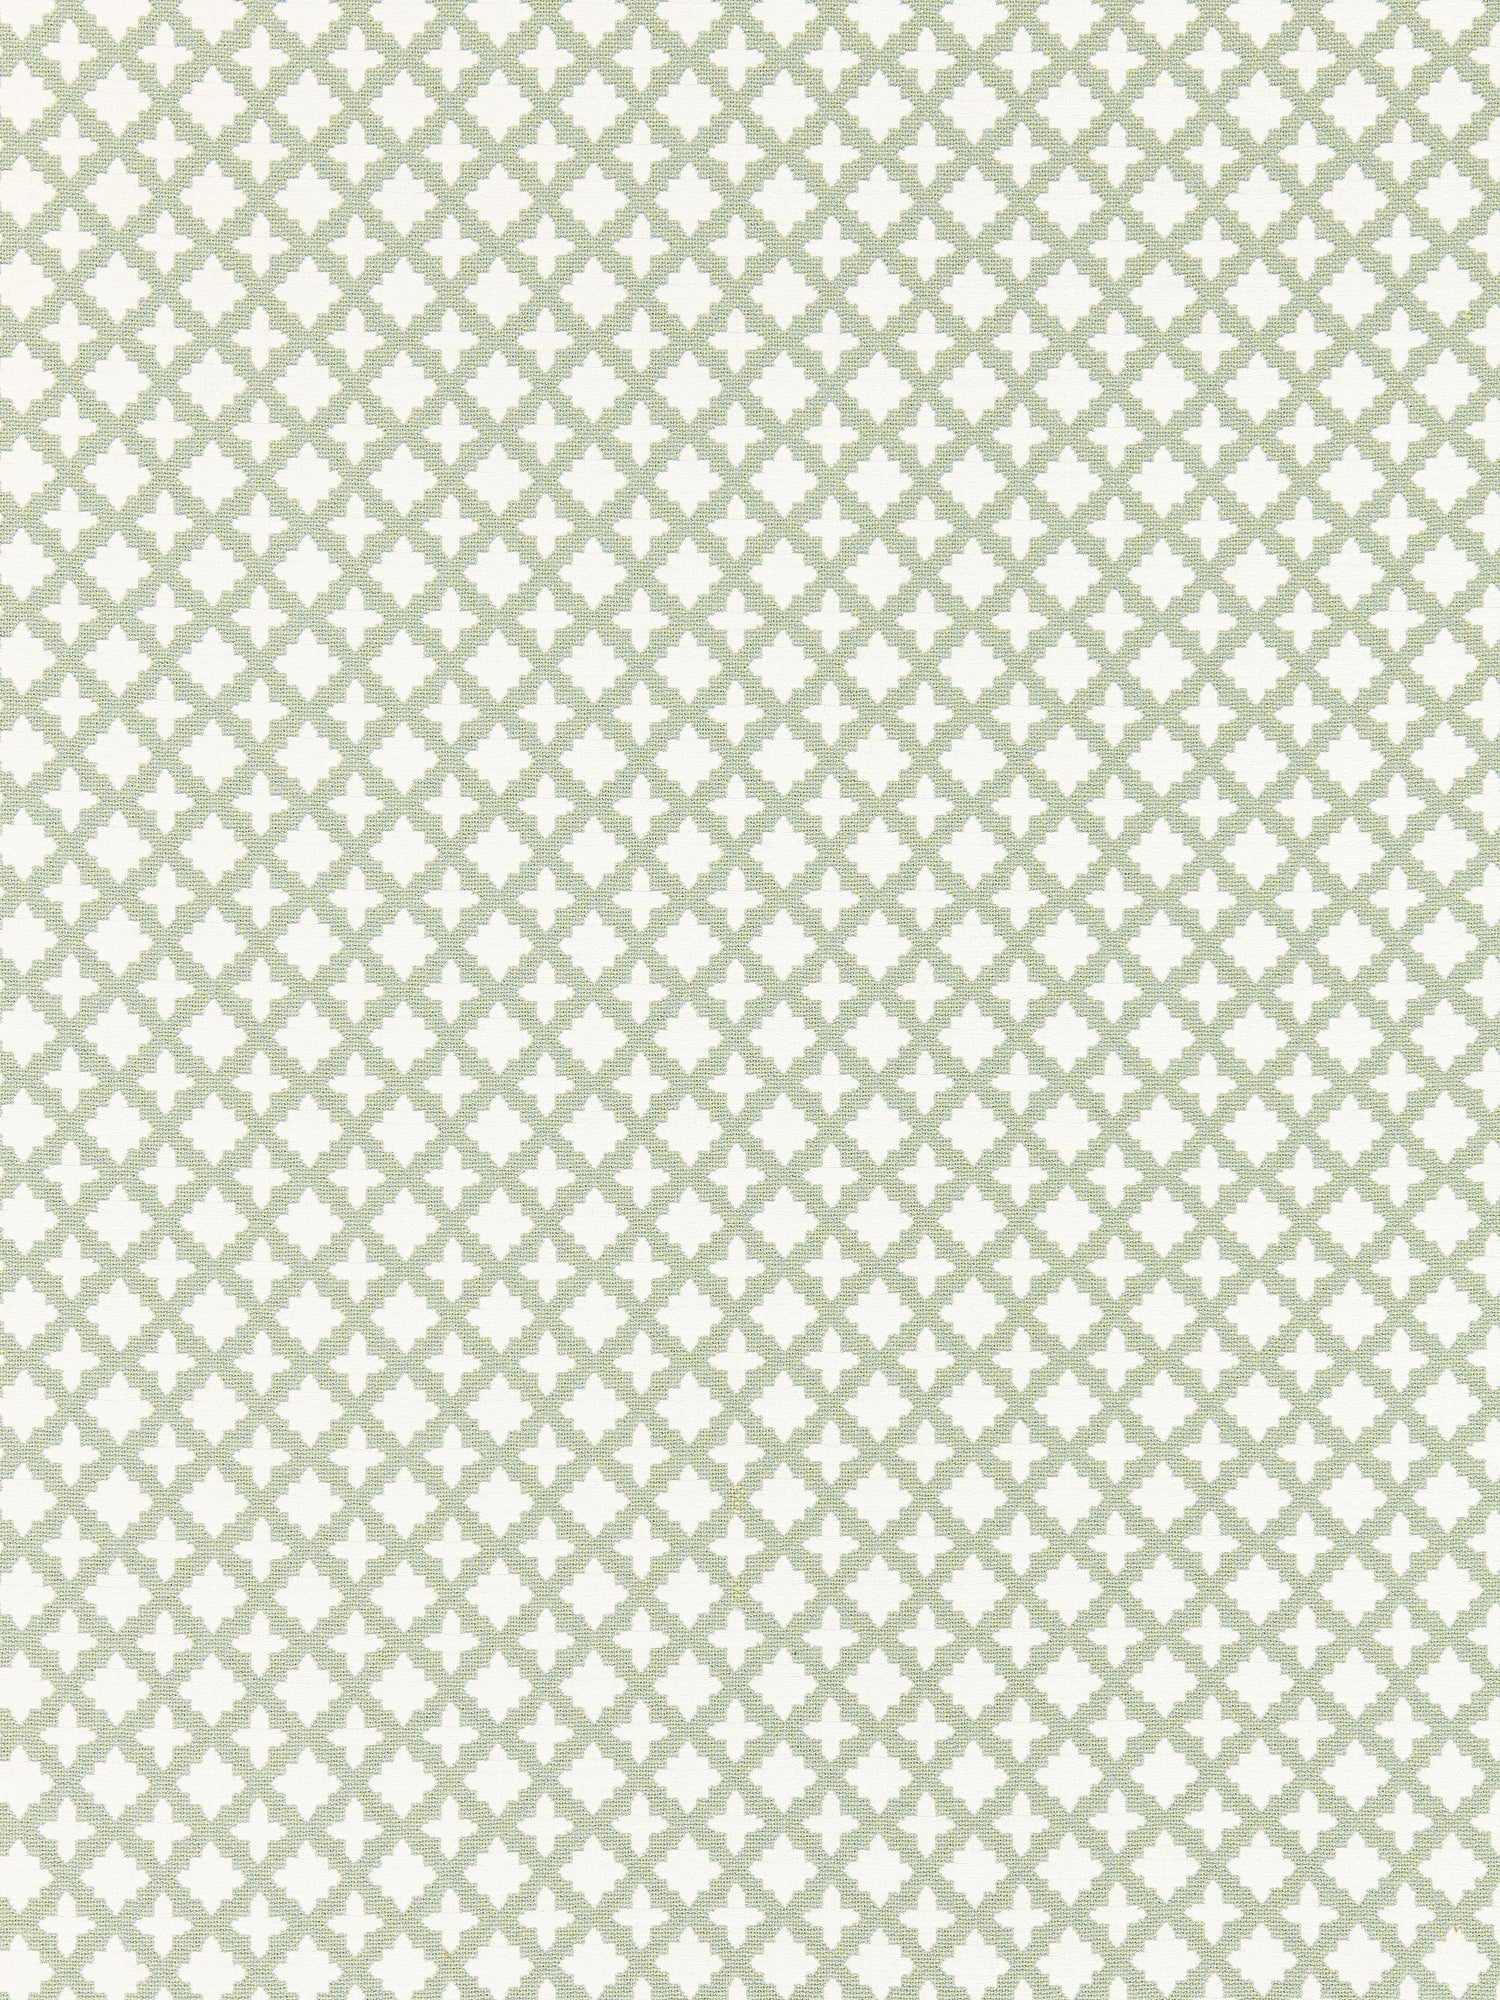 Marrakesh Weave fabric in aquamarine color - pattern number SC 000127034 - by Scalamandre in the Scalamandre Fabrics Book 1 collection